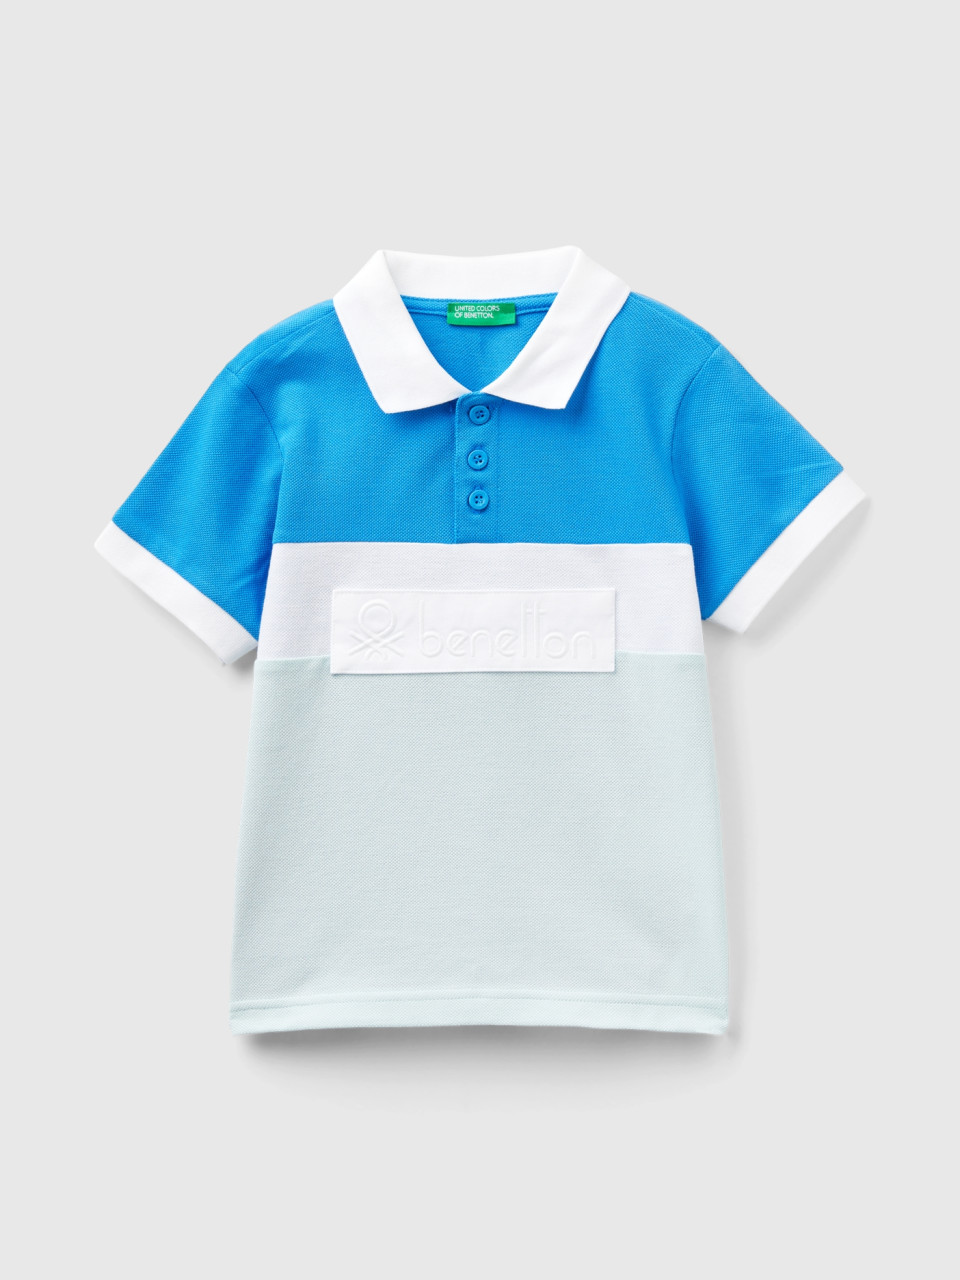 Benetton, Poloshirt In Color Block Mit Patch, Blau, male